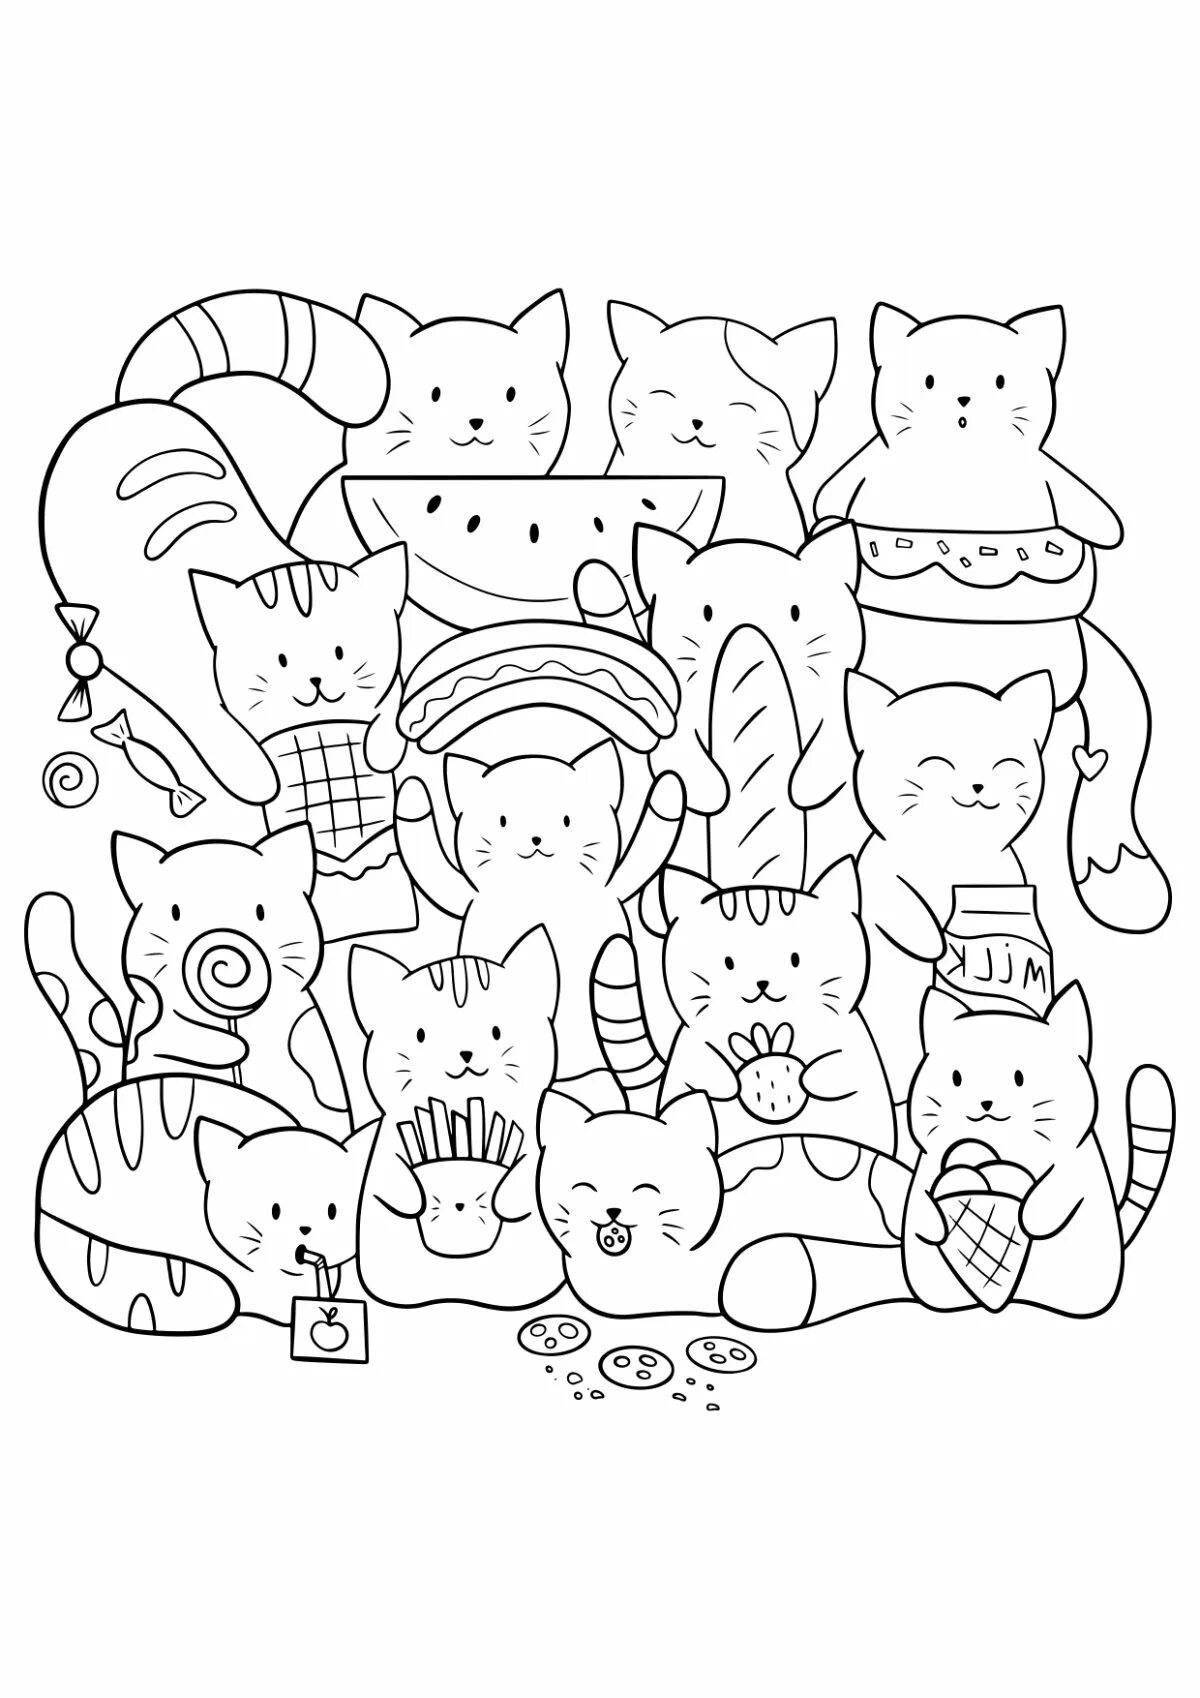 Live kitten in a mug coloring book